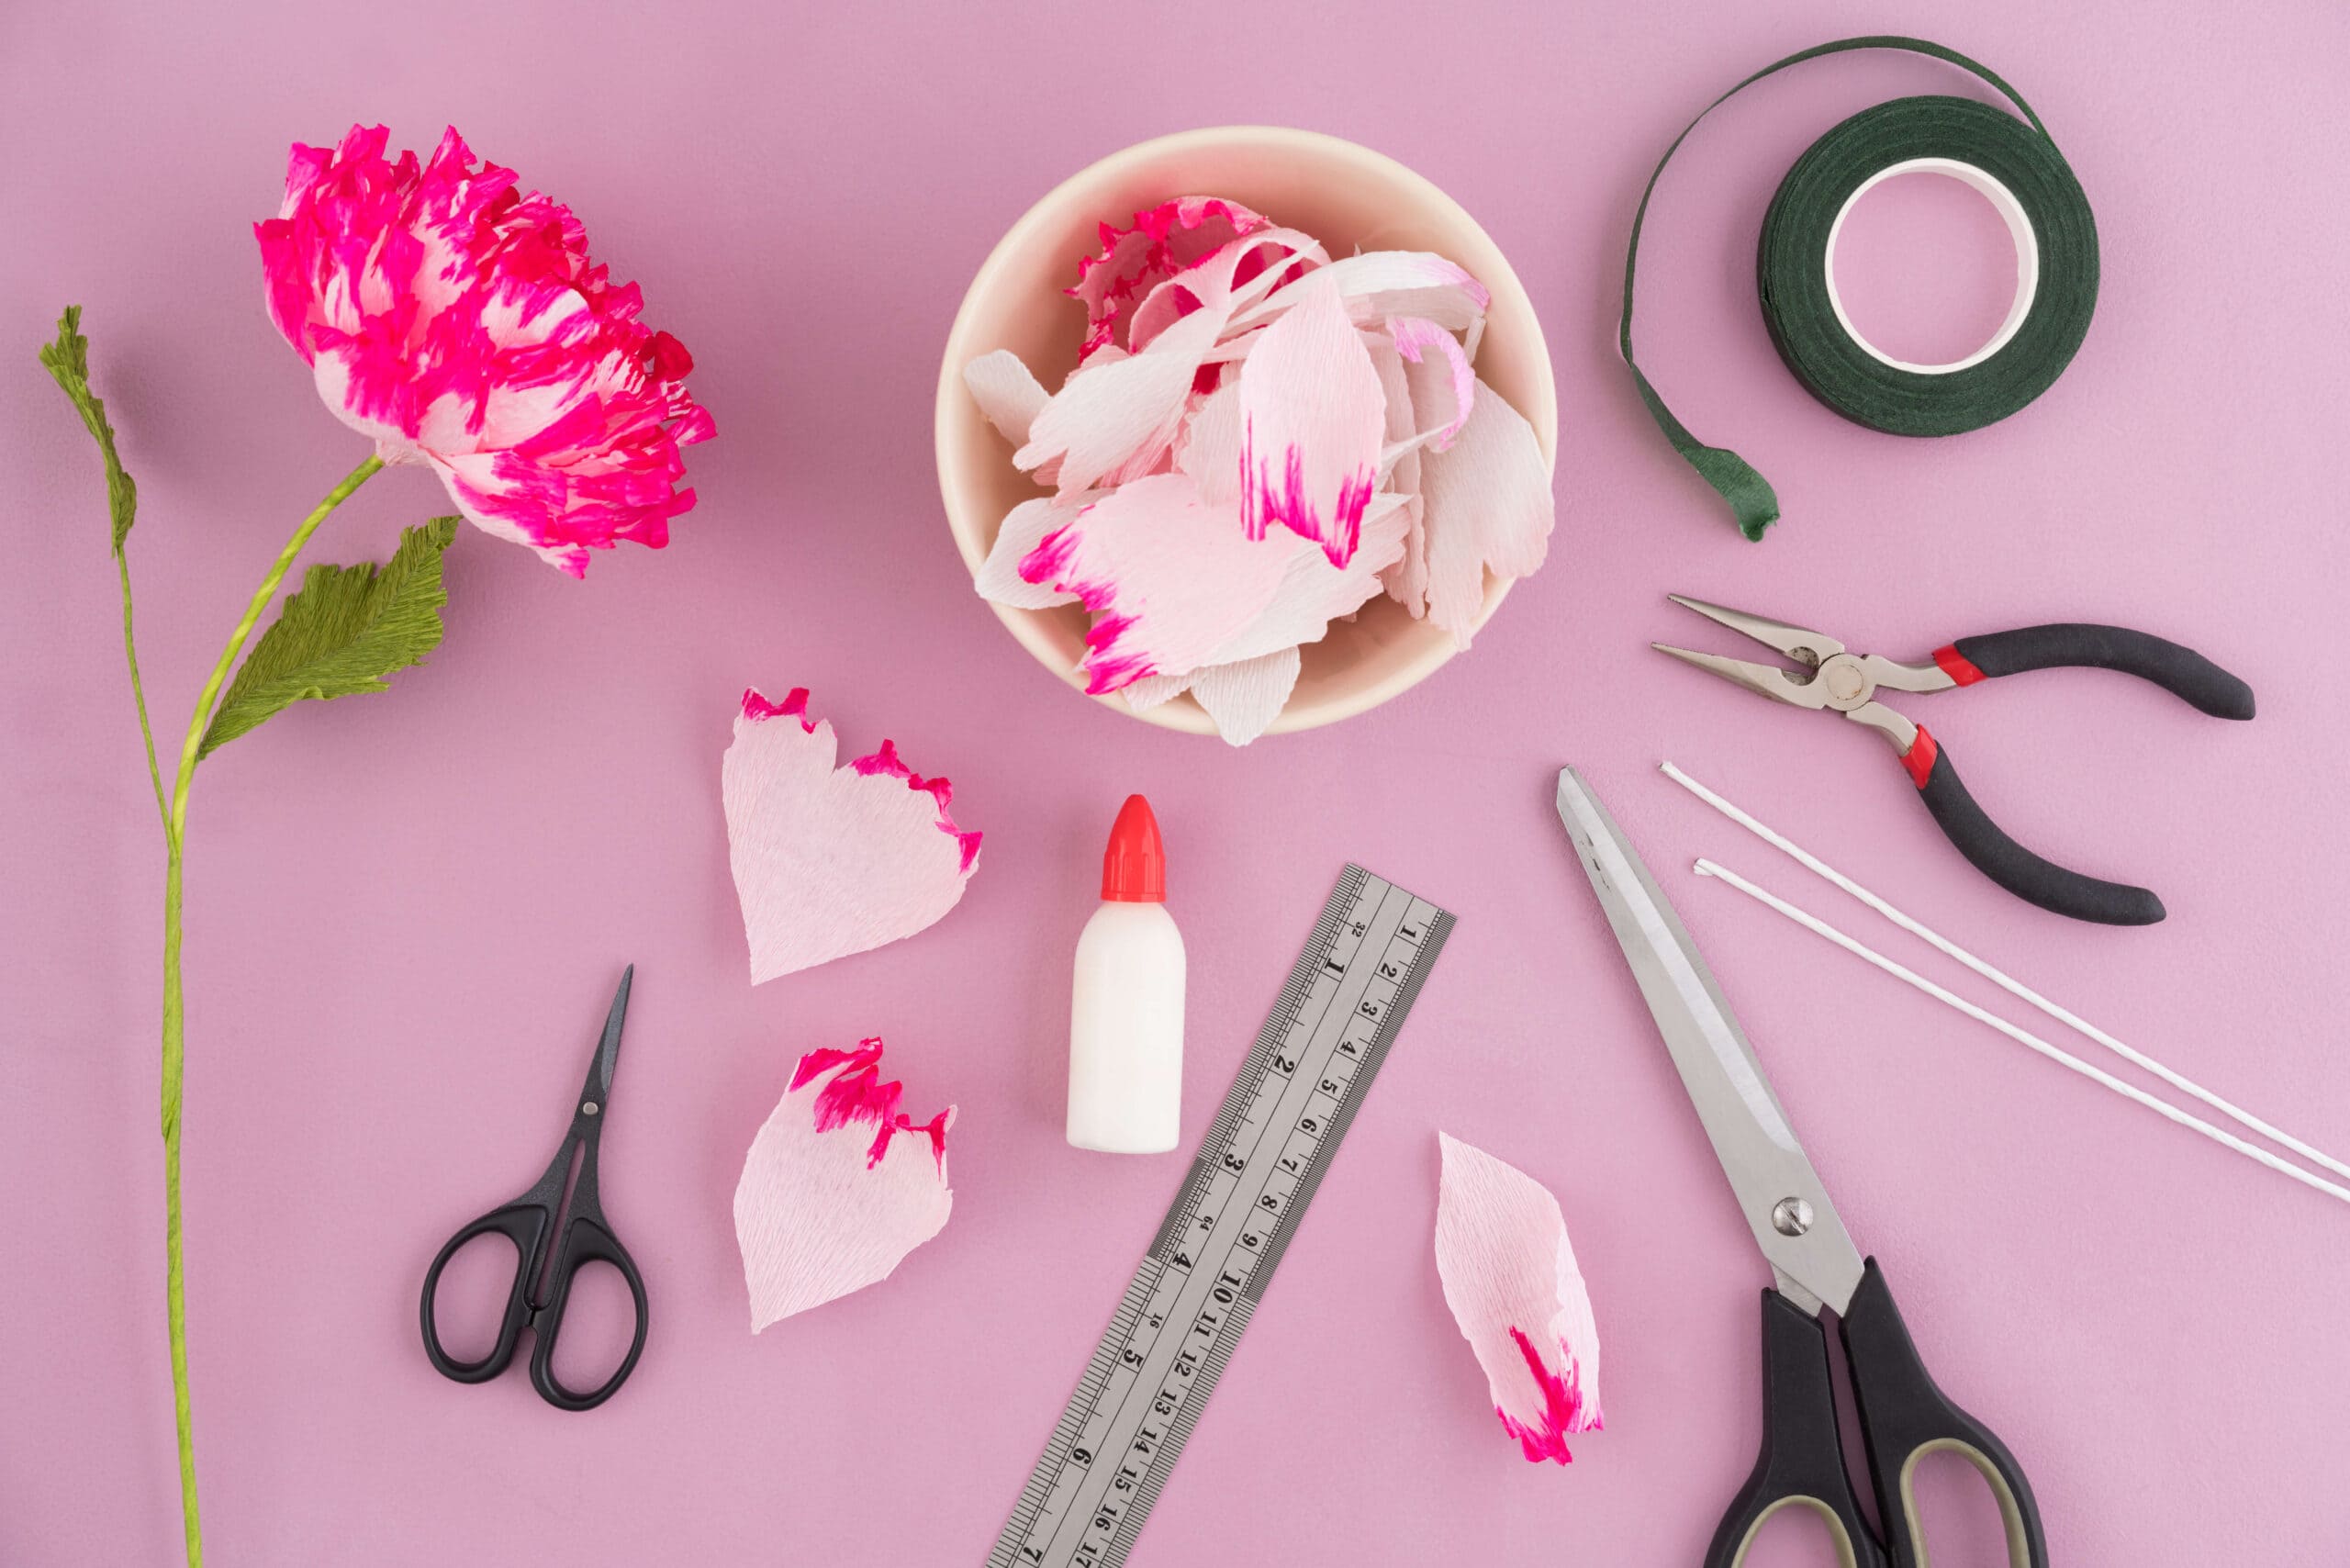 How to Make Crepe Paper Flowers